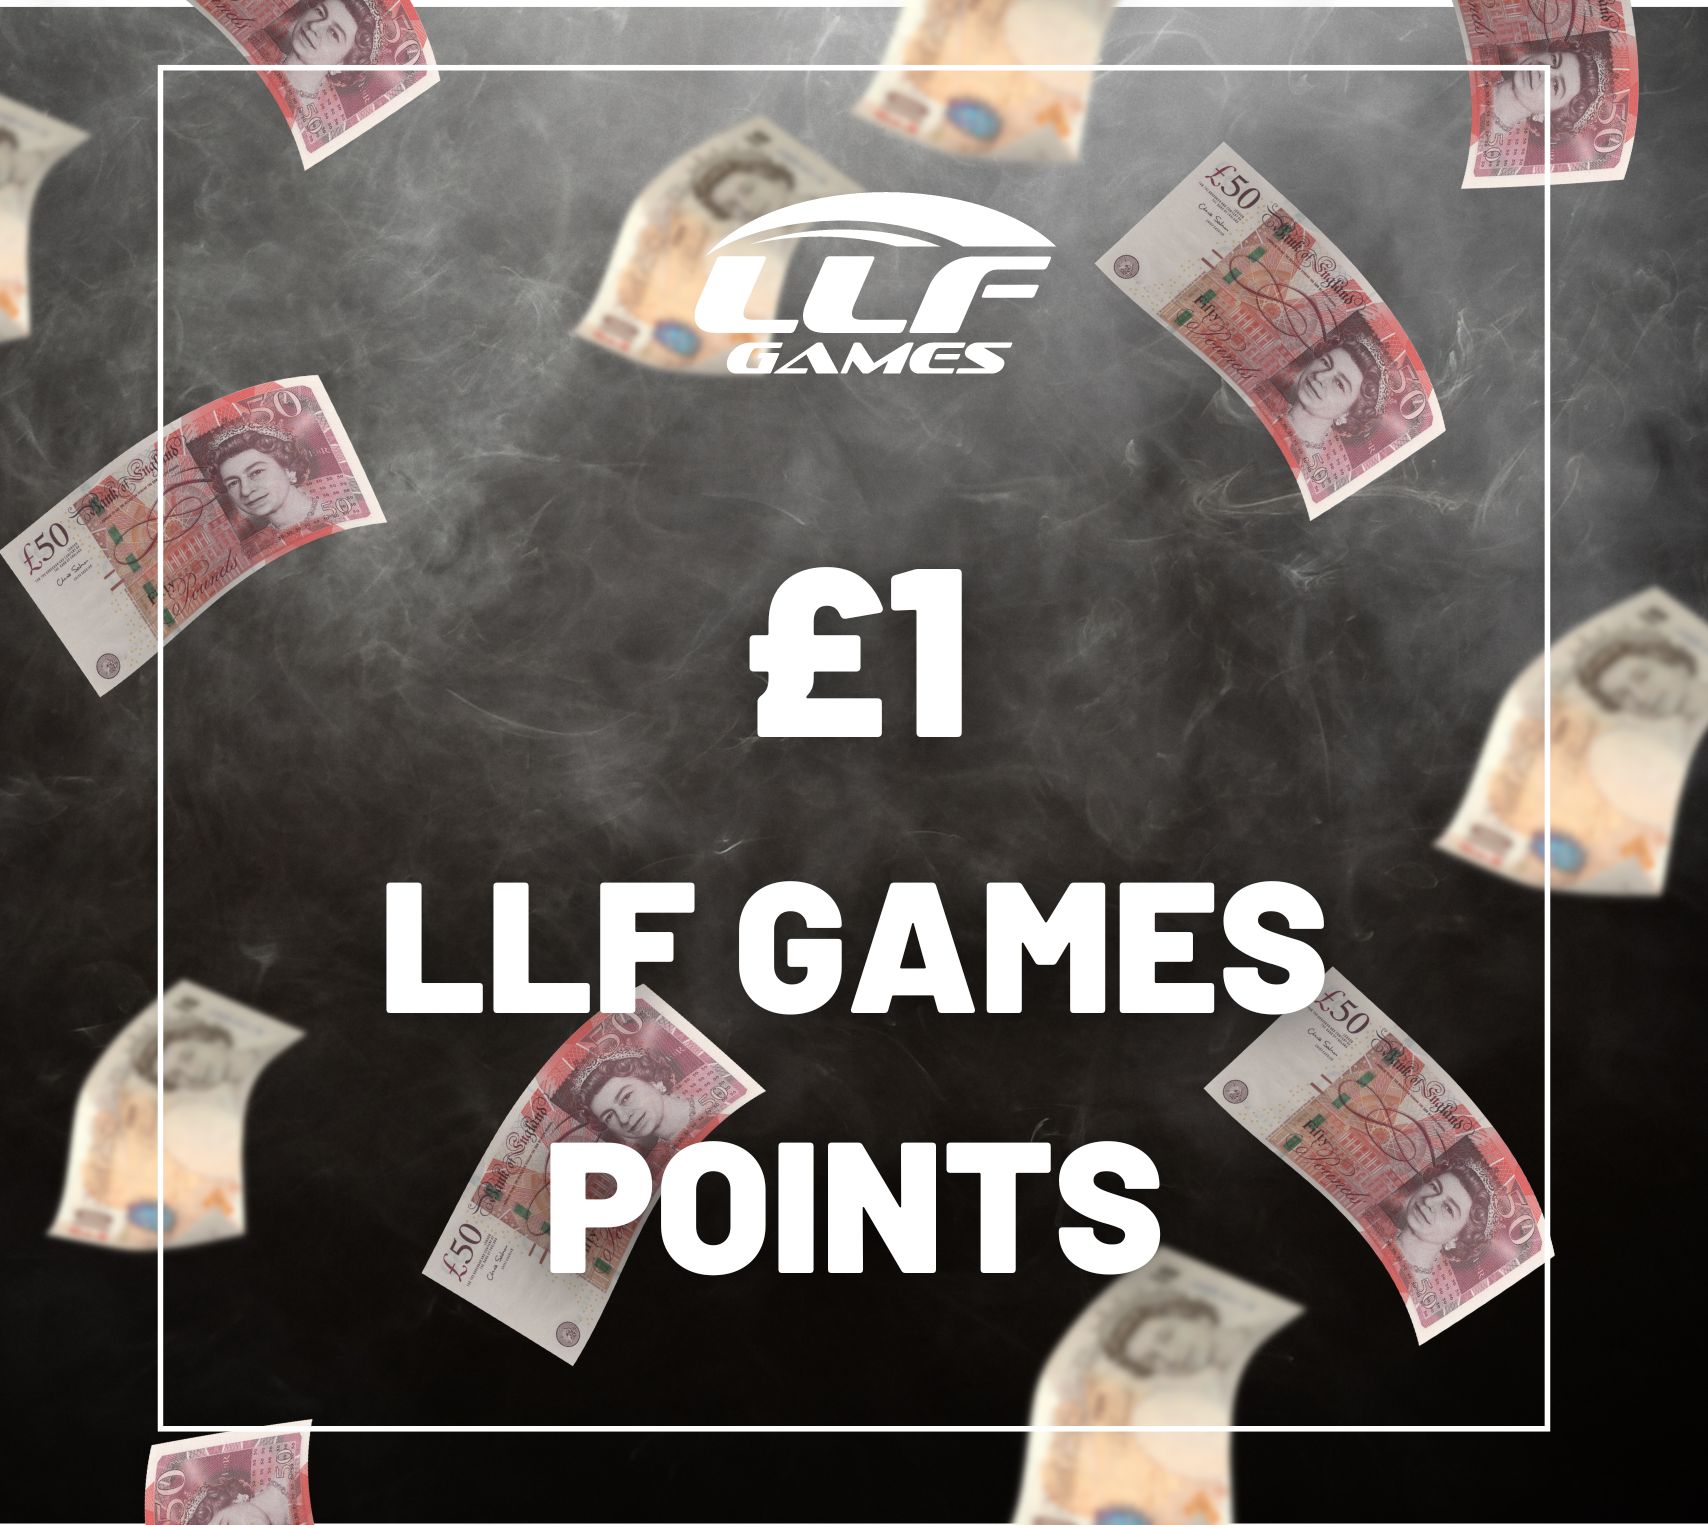 £1 Site Credit (LLF Games Points)